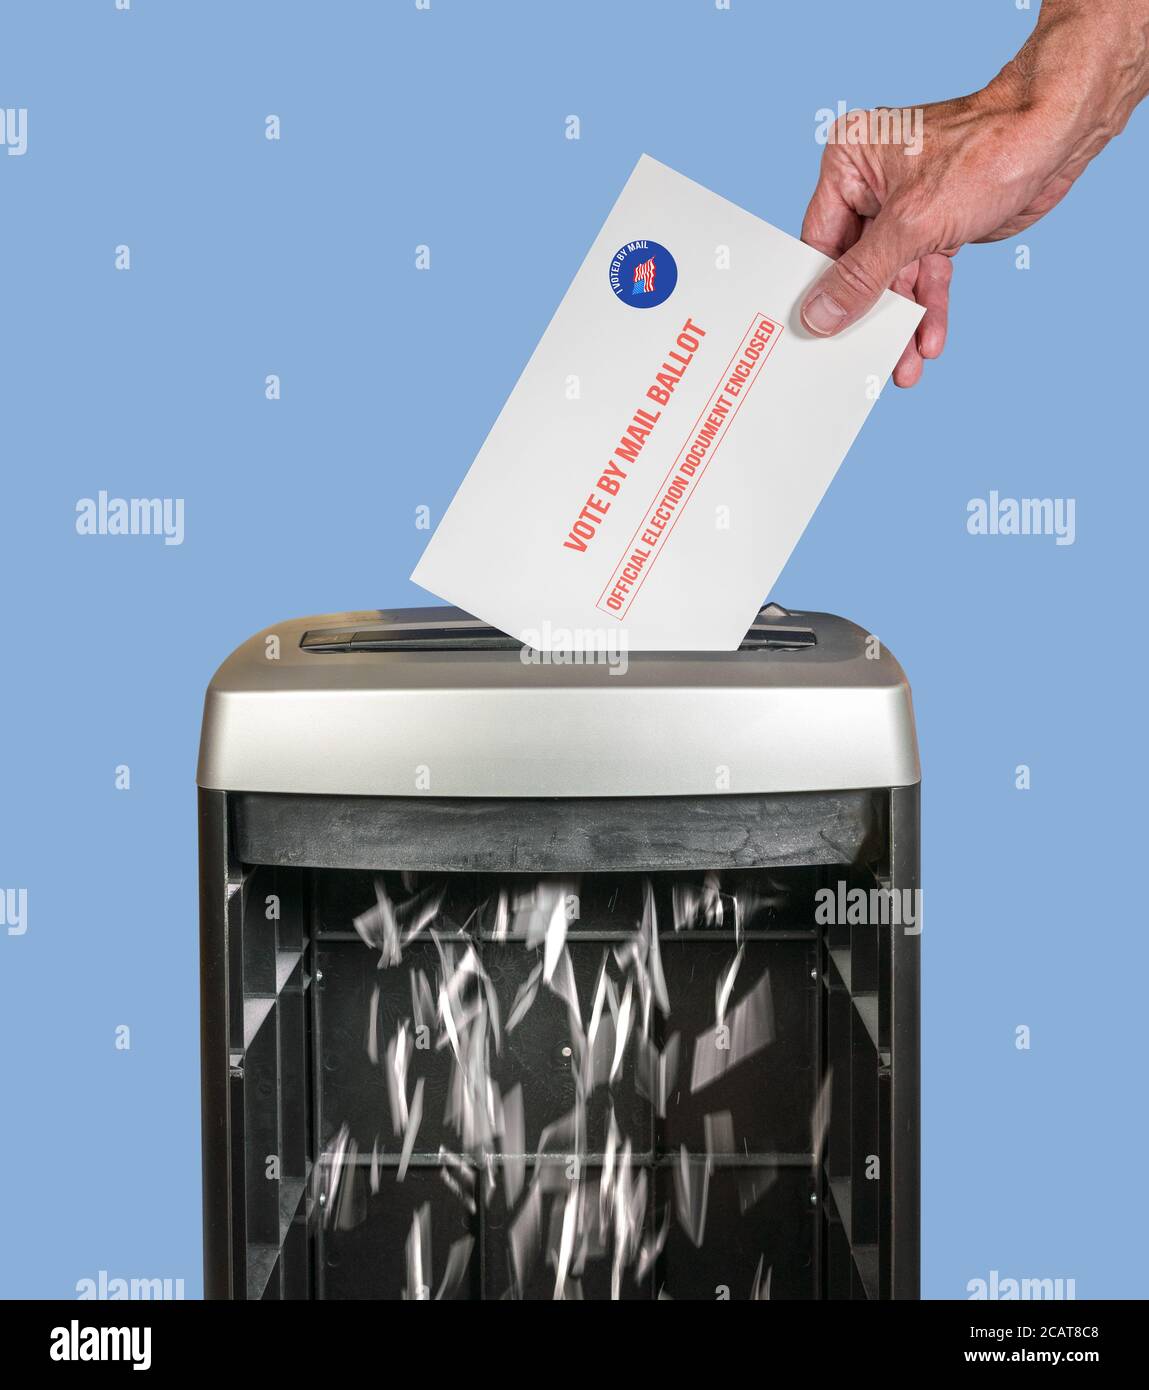 Vote by mail or absentee ballot being shredded in office paper shredder as illustration of voting fraud or lost votes in Presidential election Stock Photo